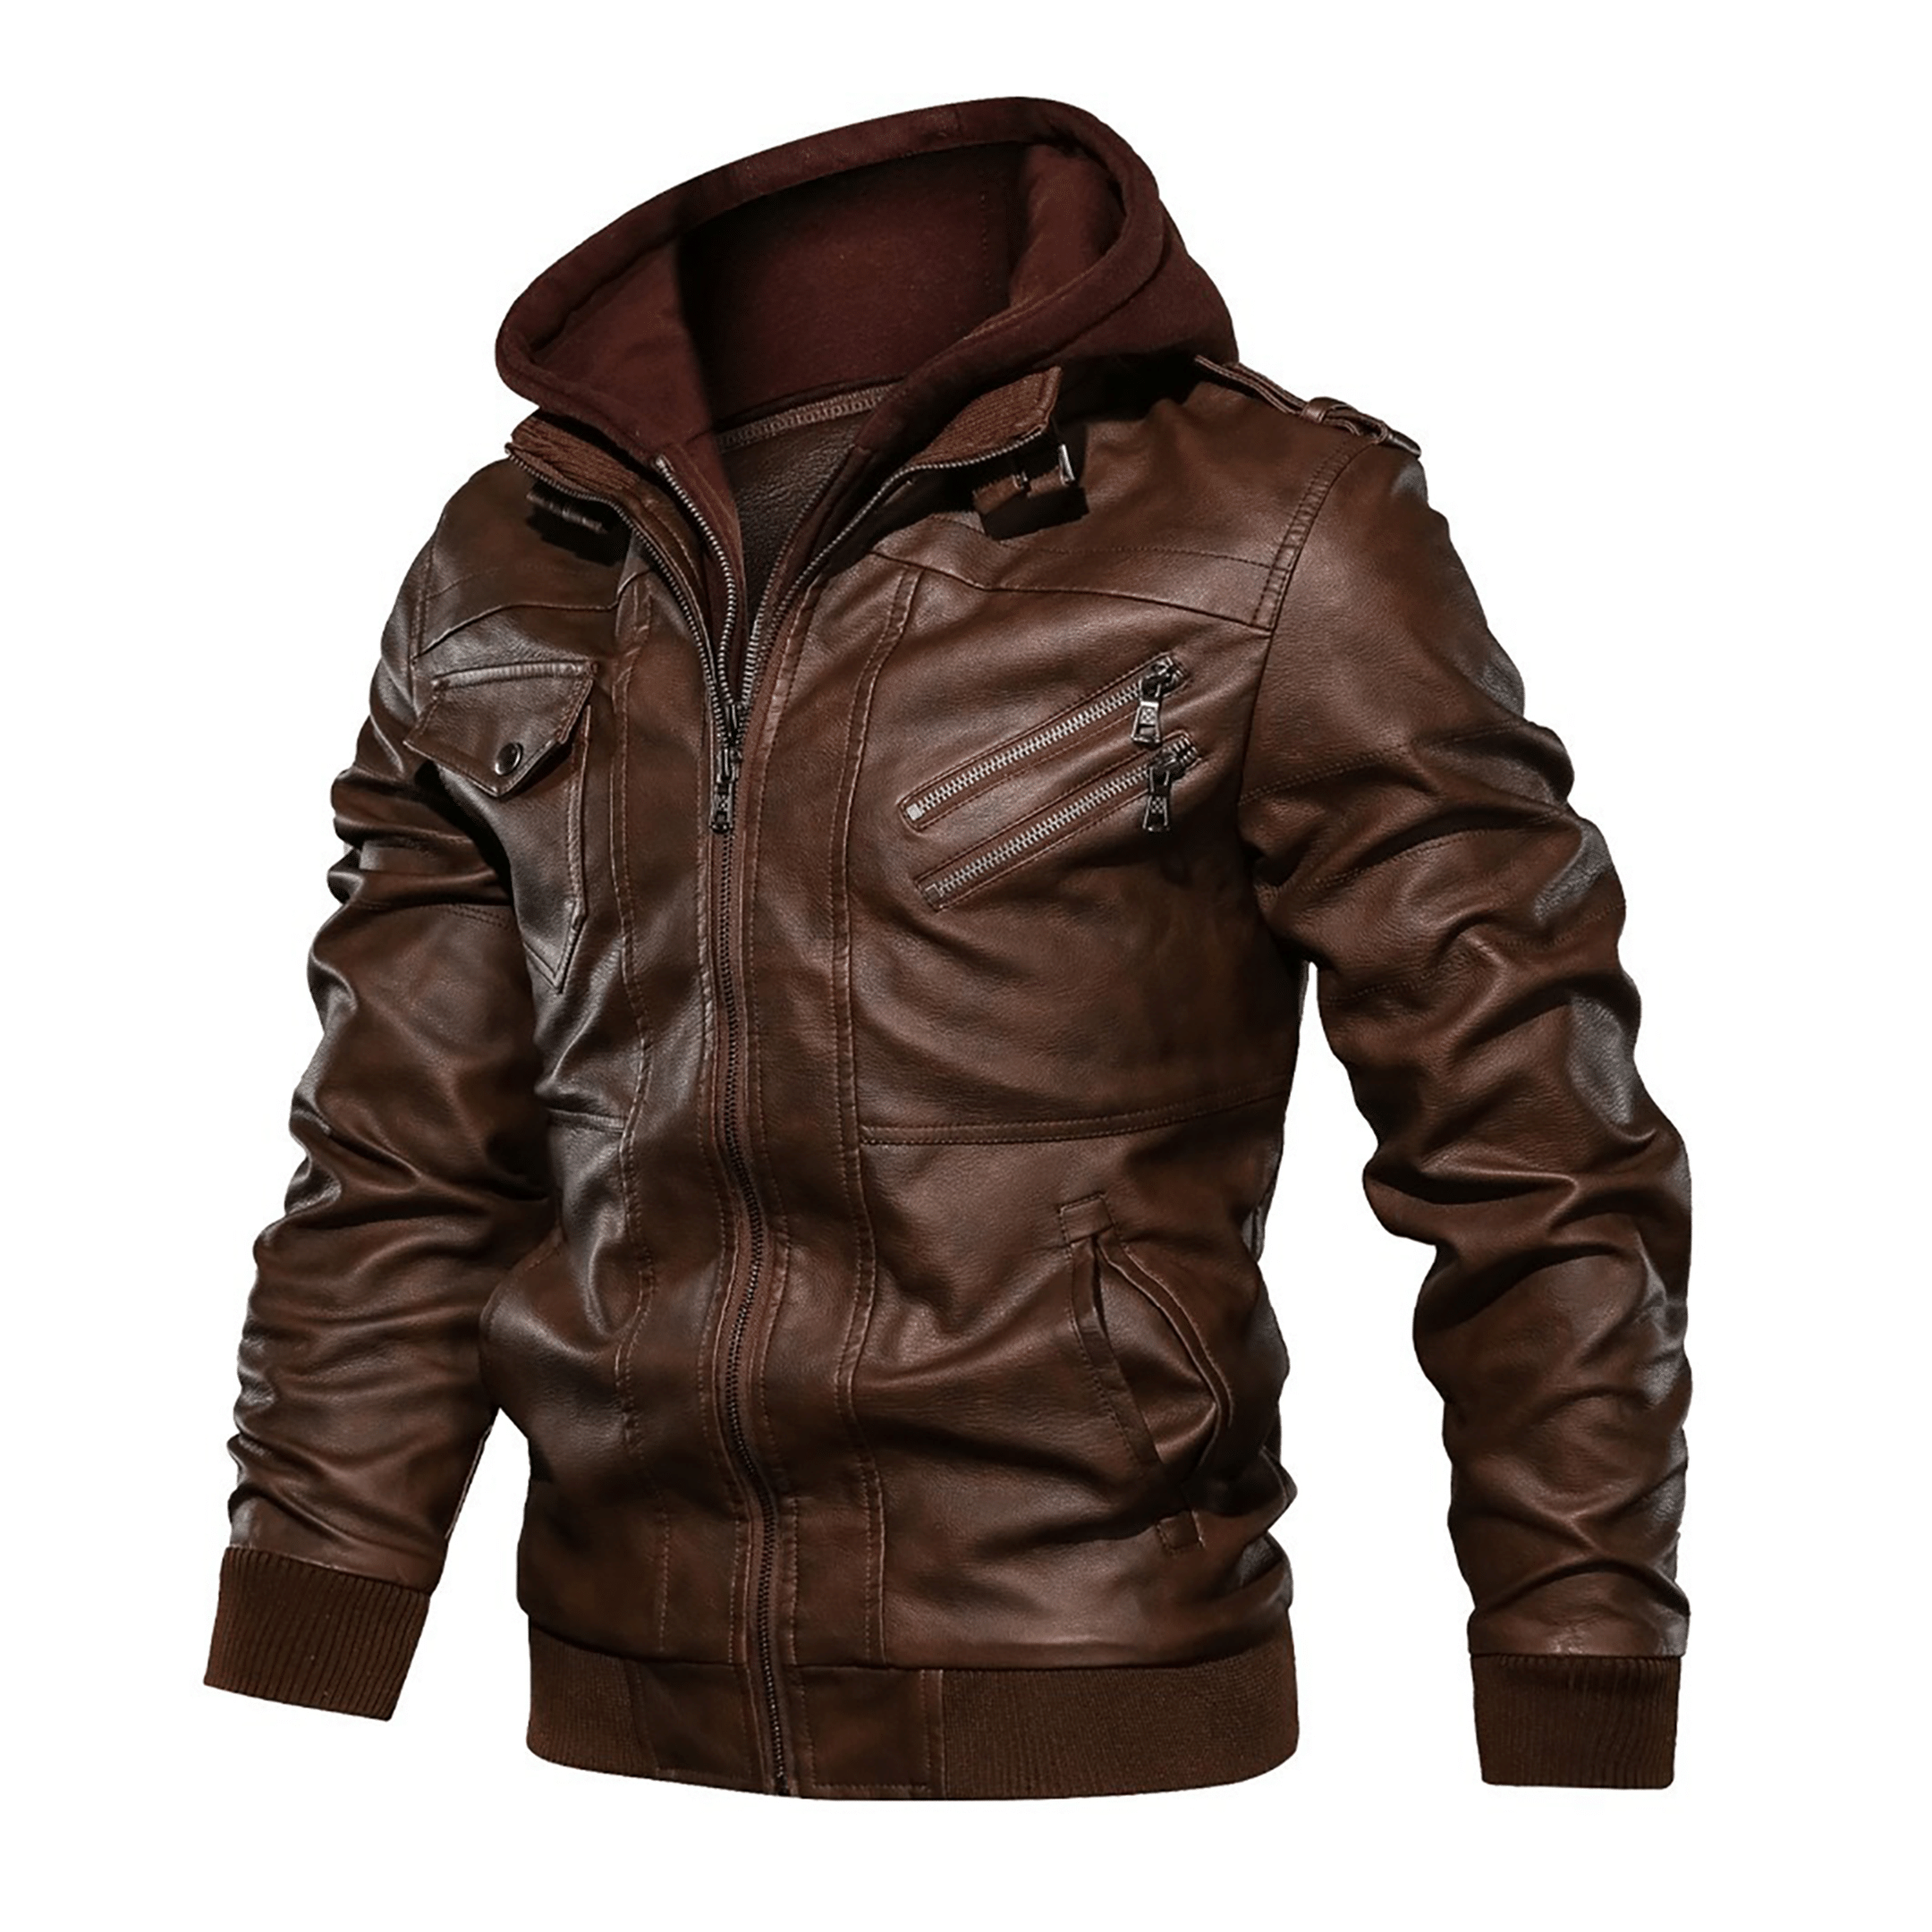 Top leather jackets and latest products 173